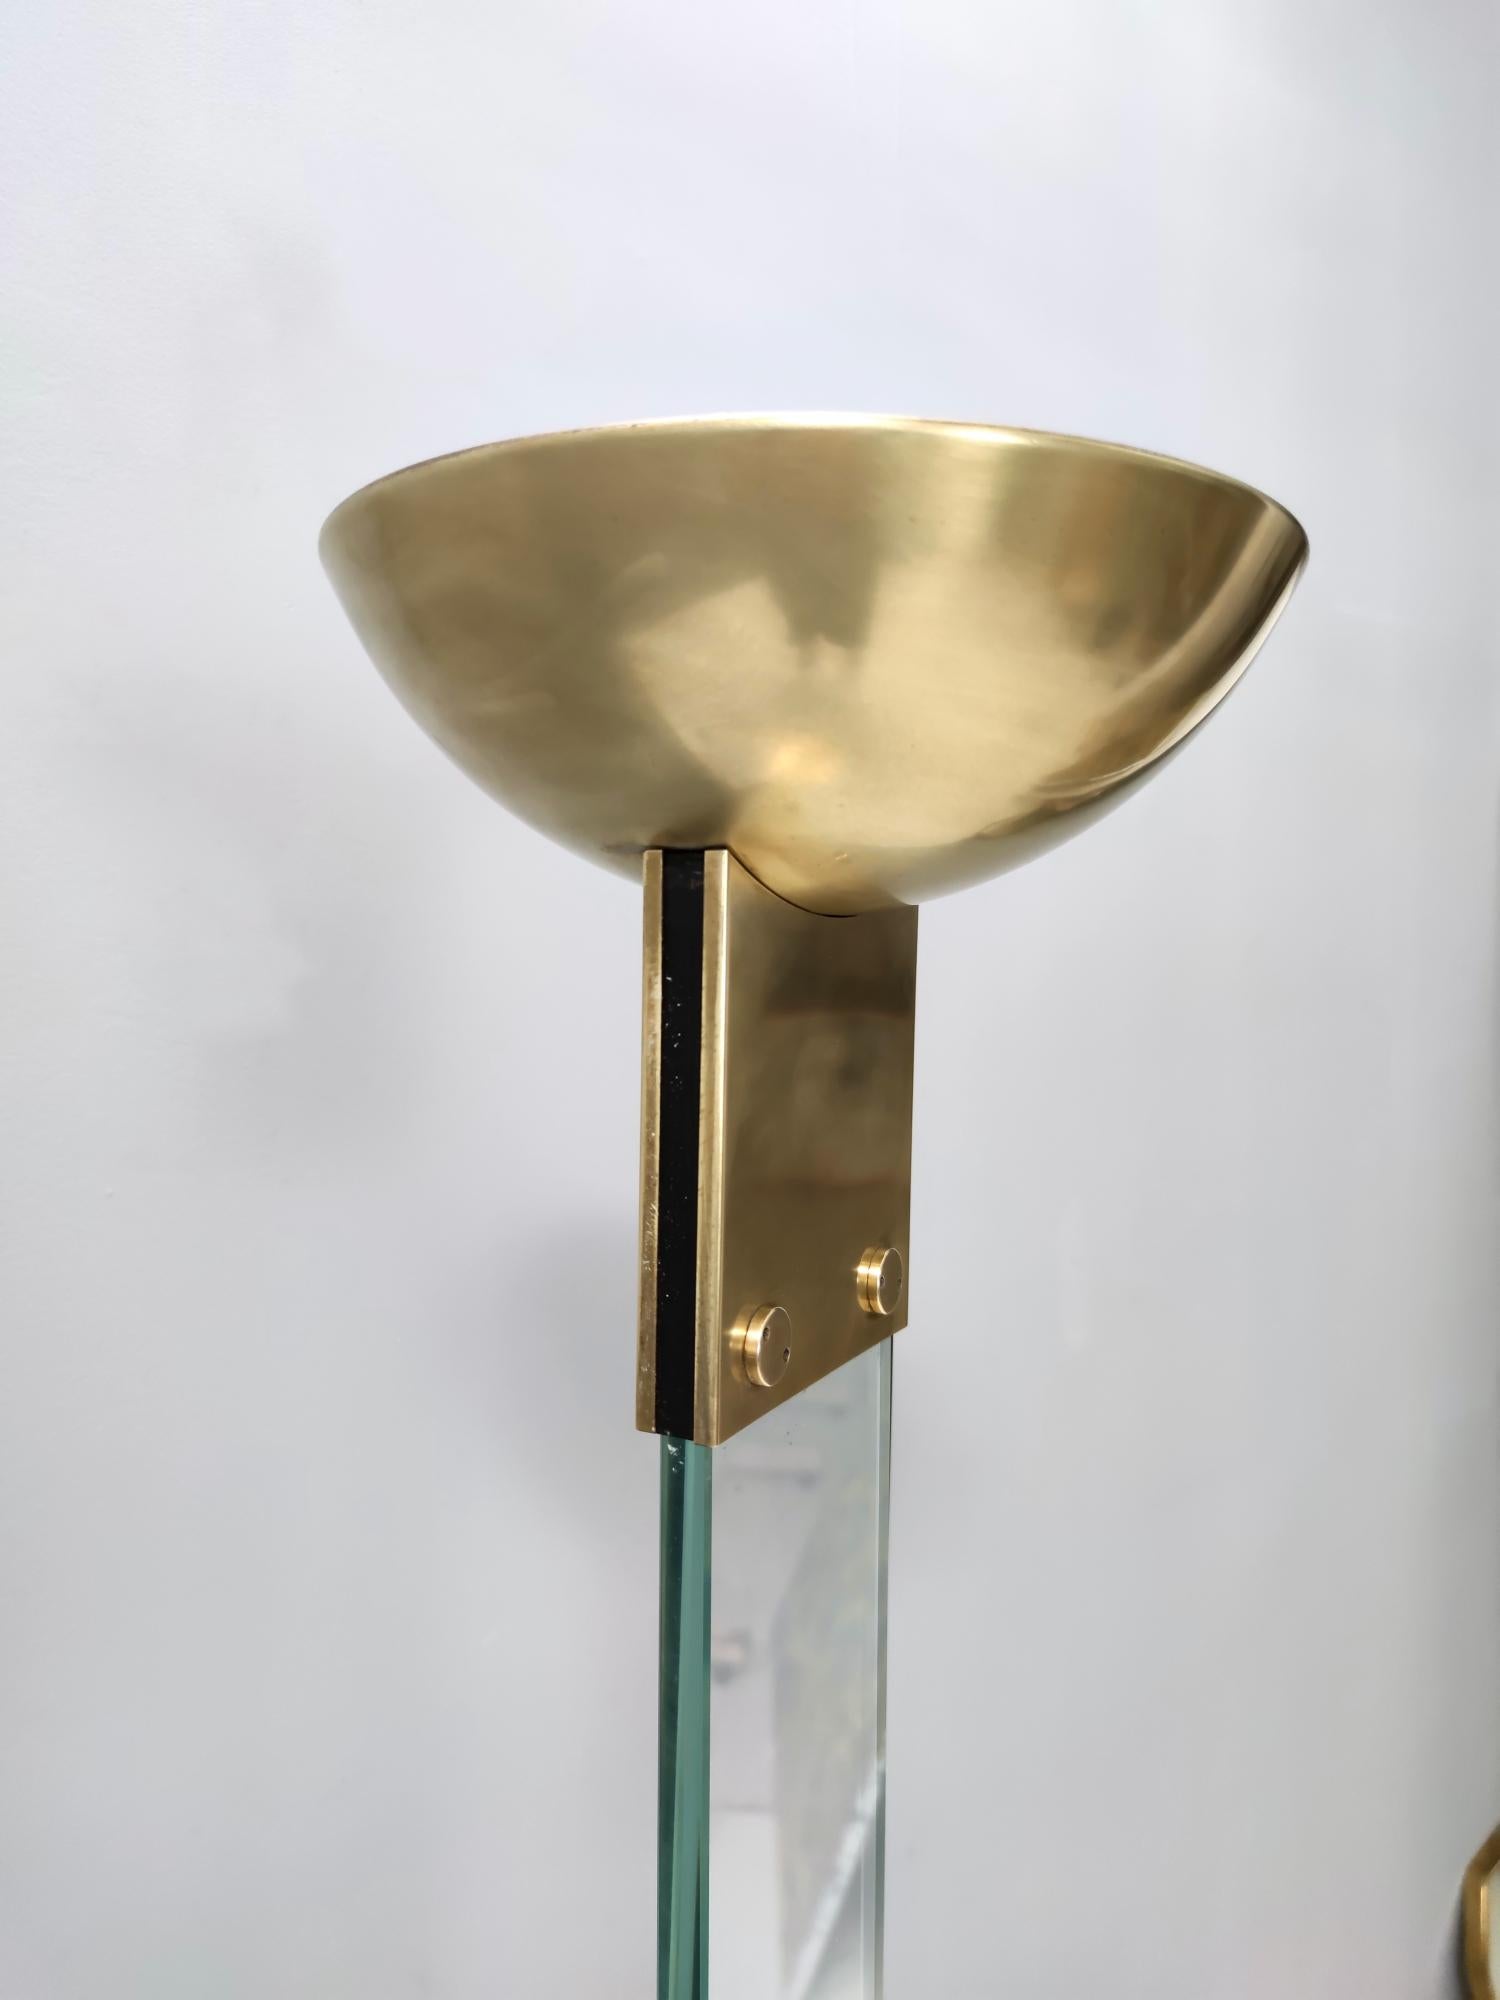 Elegant Postmodern Glass, Brass and Varnished Metal Floor Lamp, Italy, 1980s For Sale 1